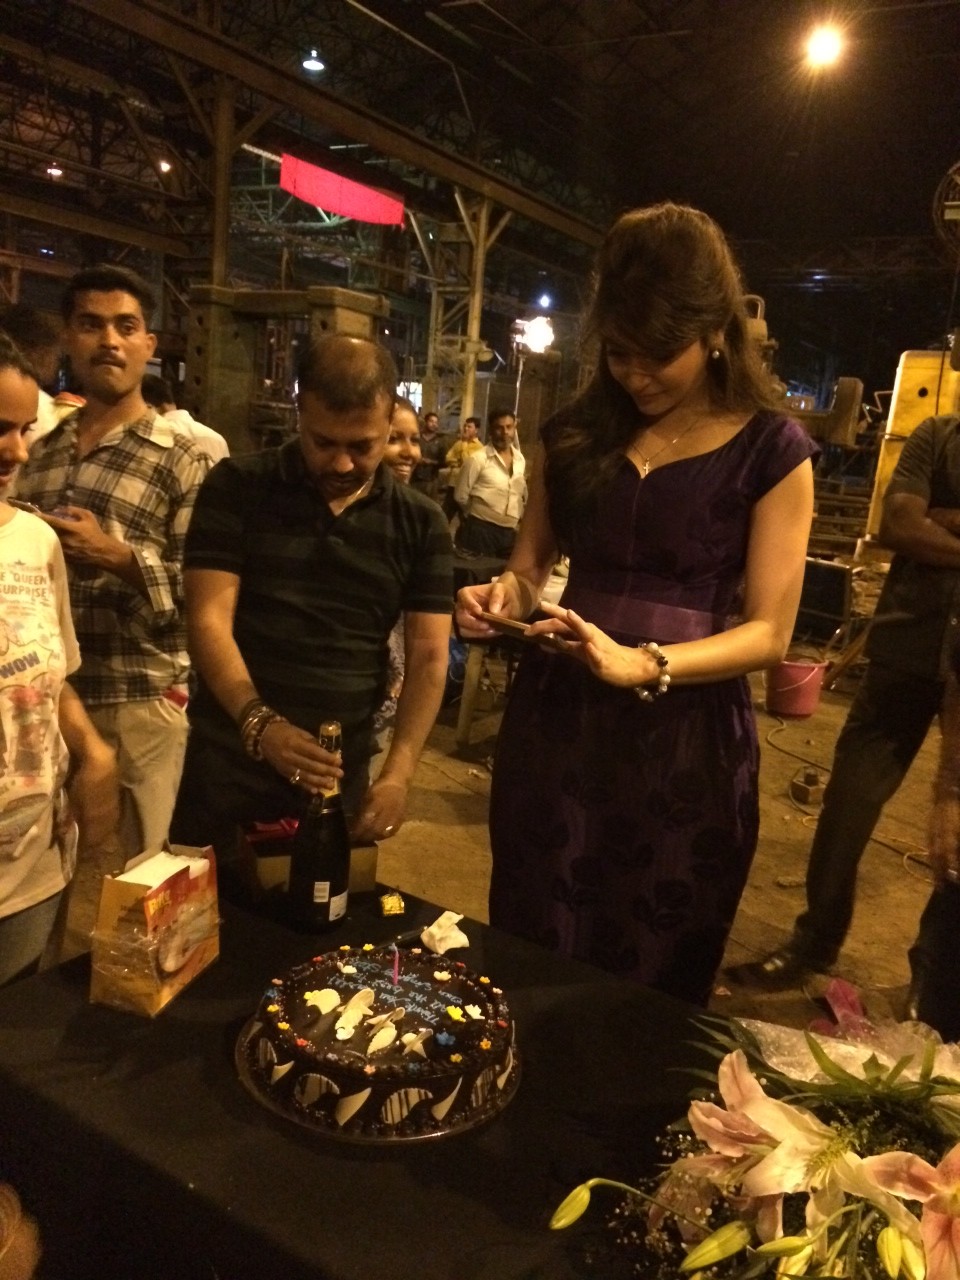 Anushka taking a picture of the cake before cutting it